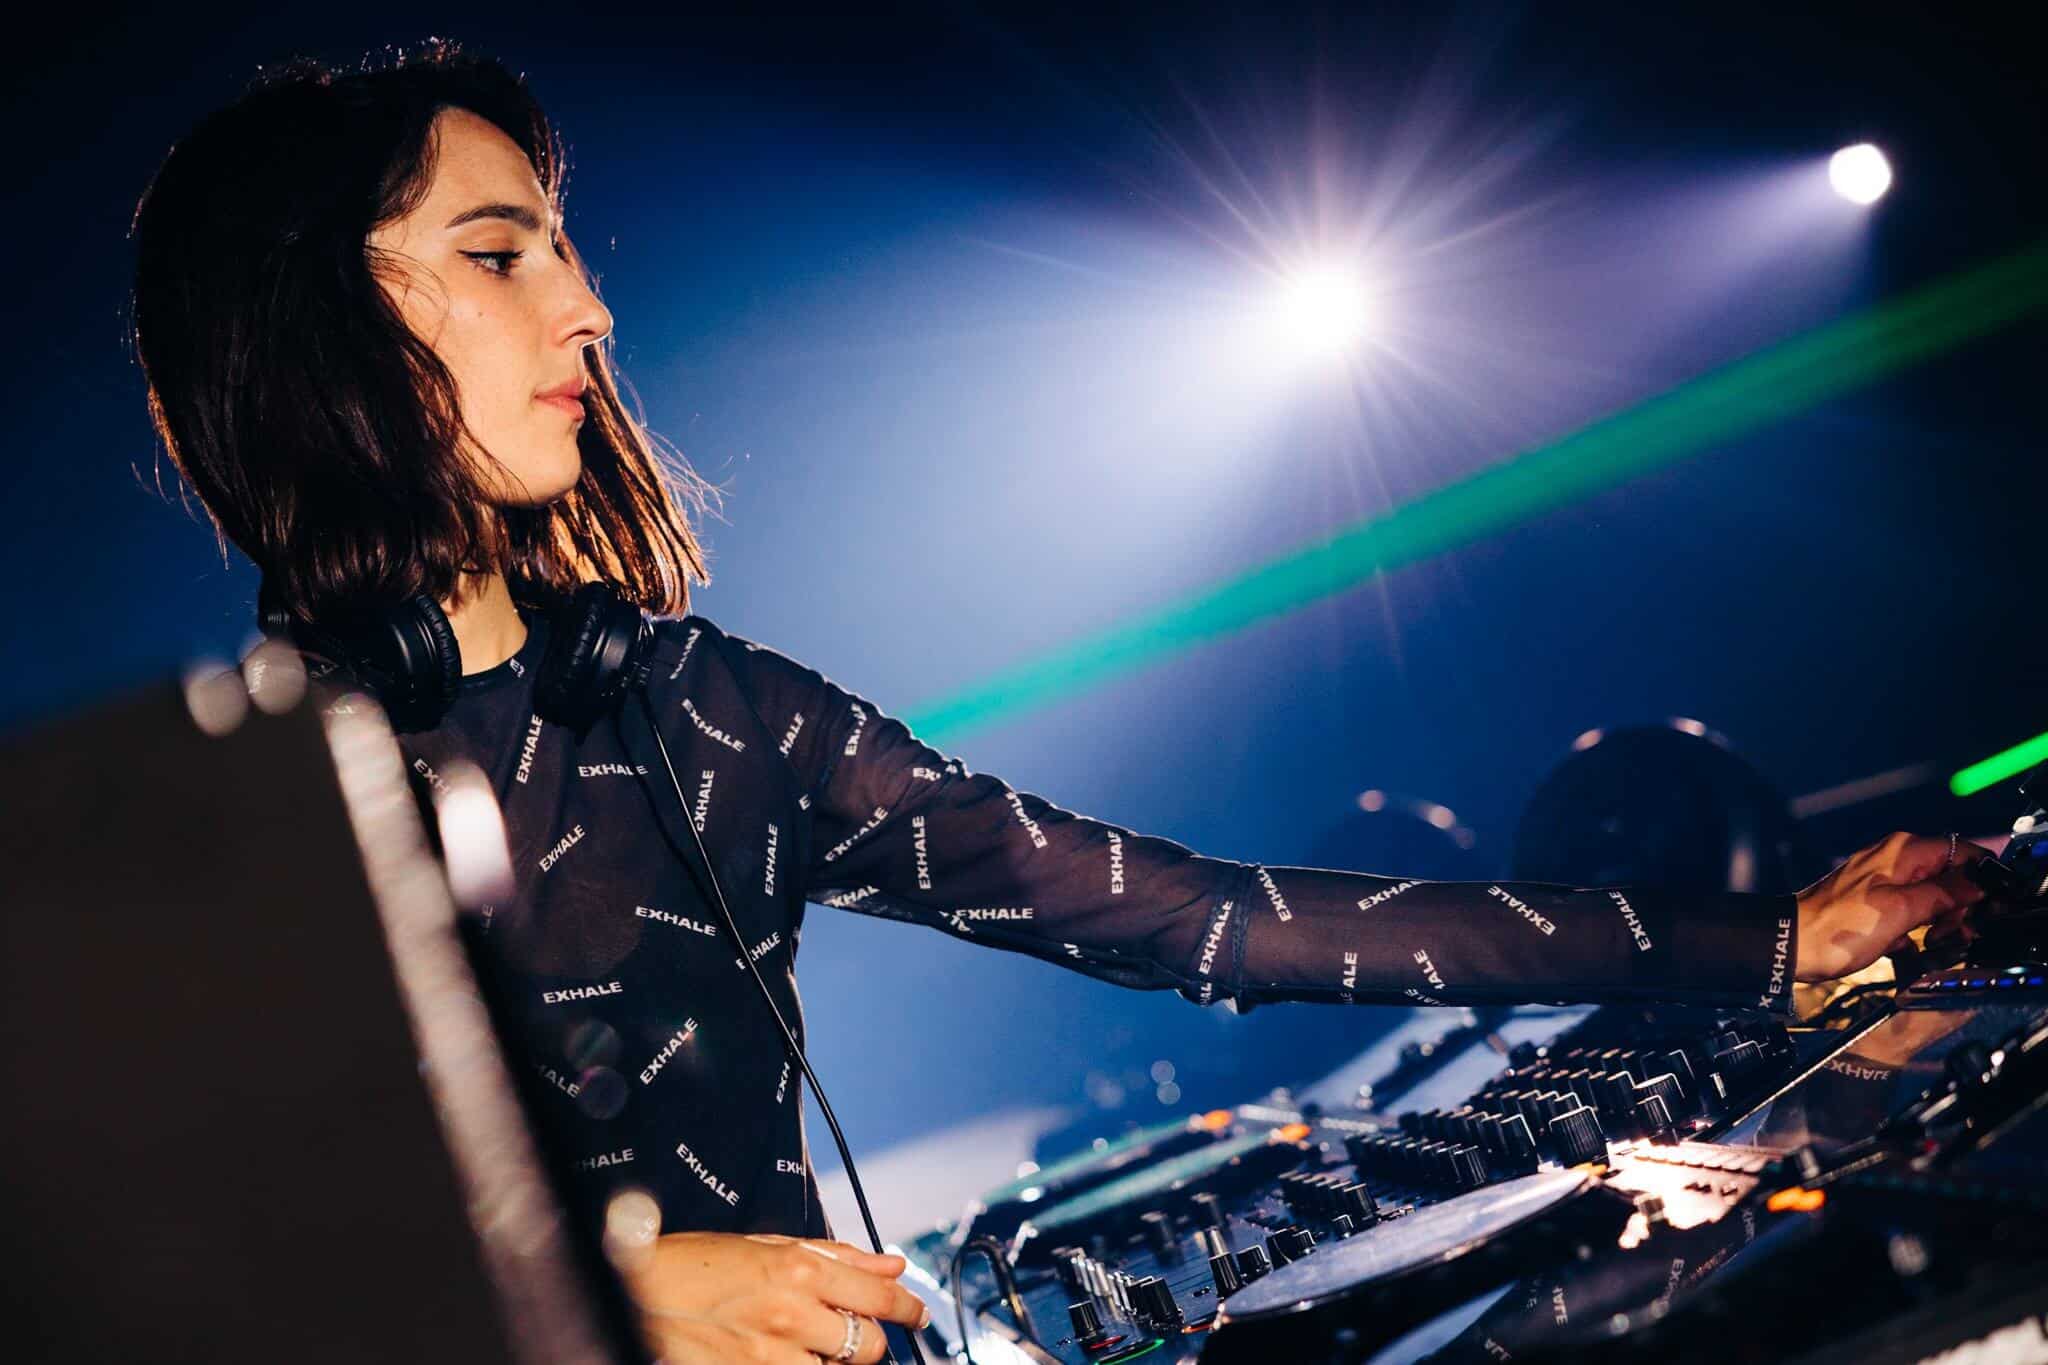 Amelie Lens’ EXHALE announces debut two-day event in Antwerp